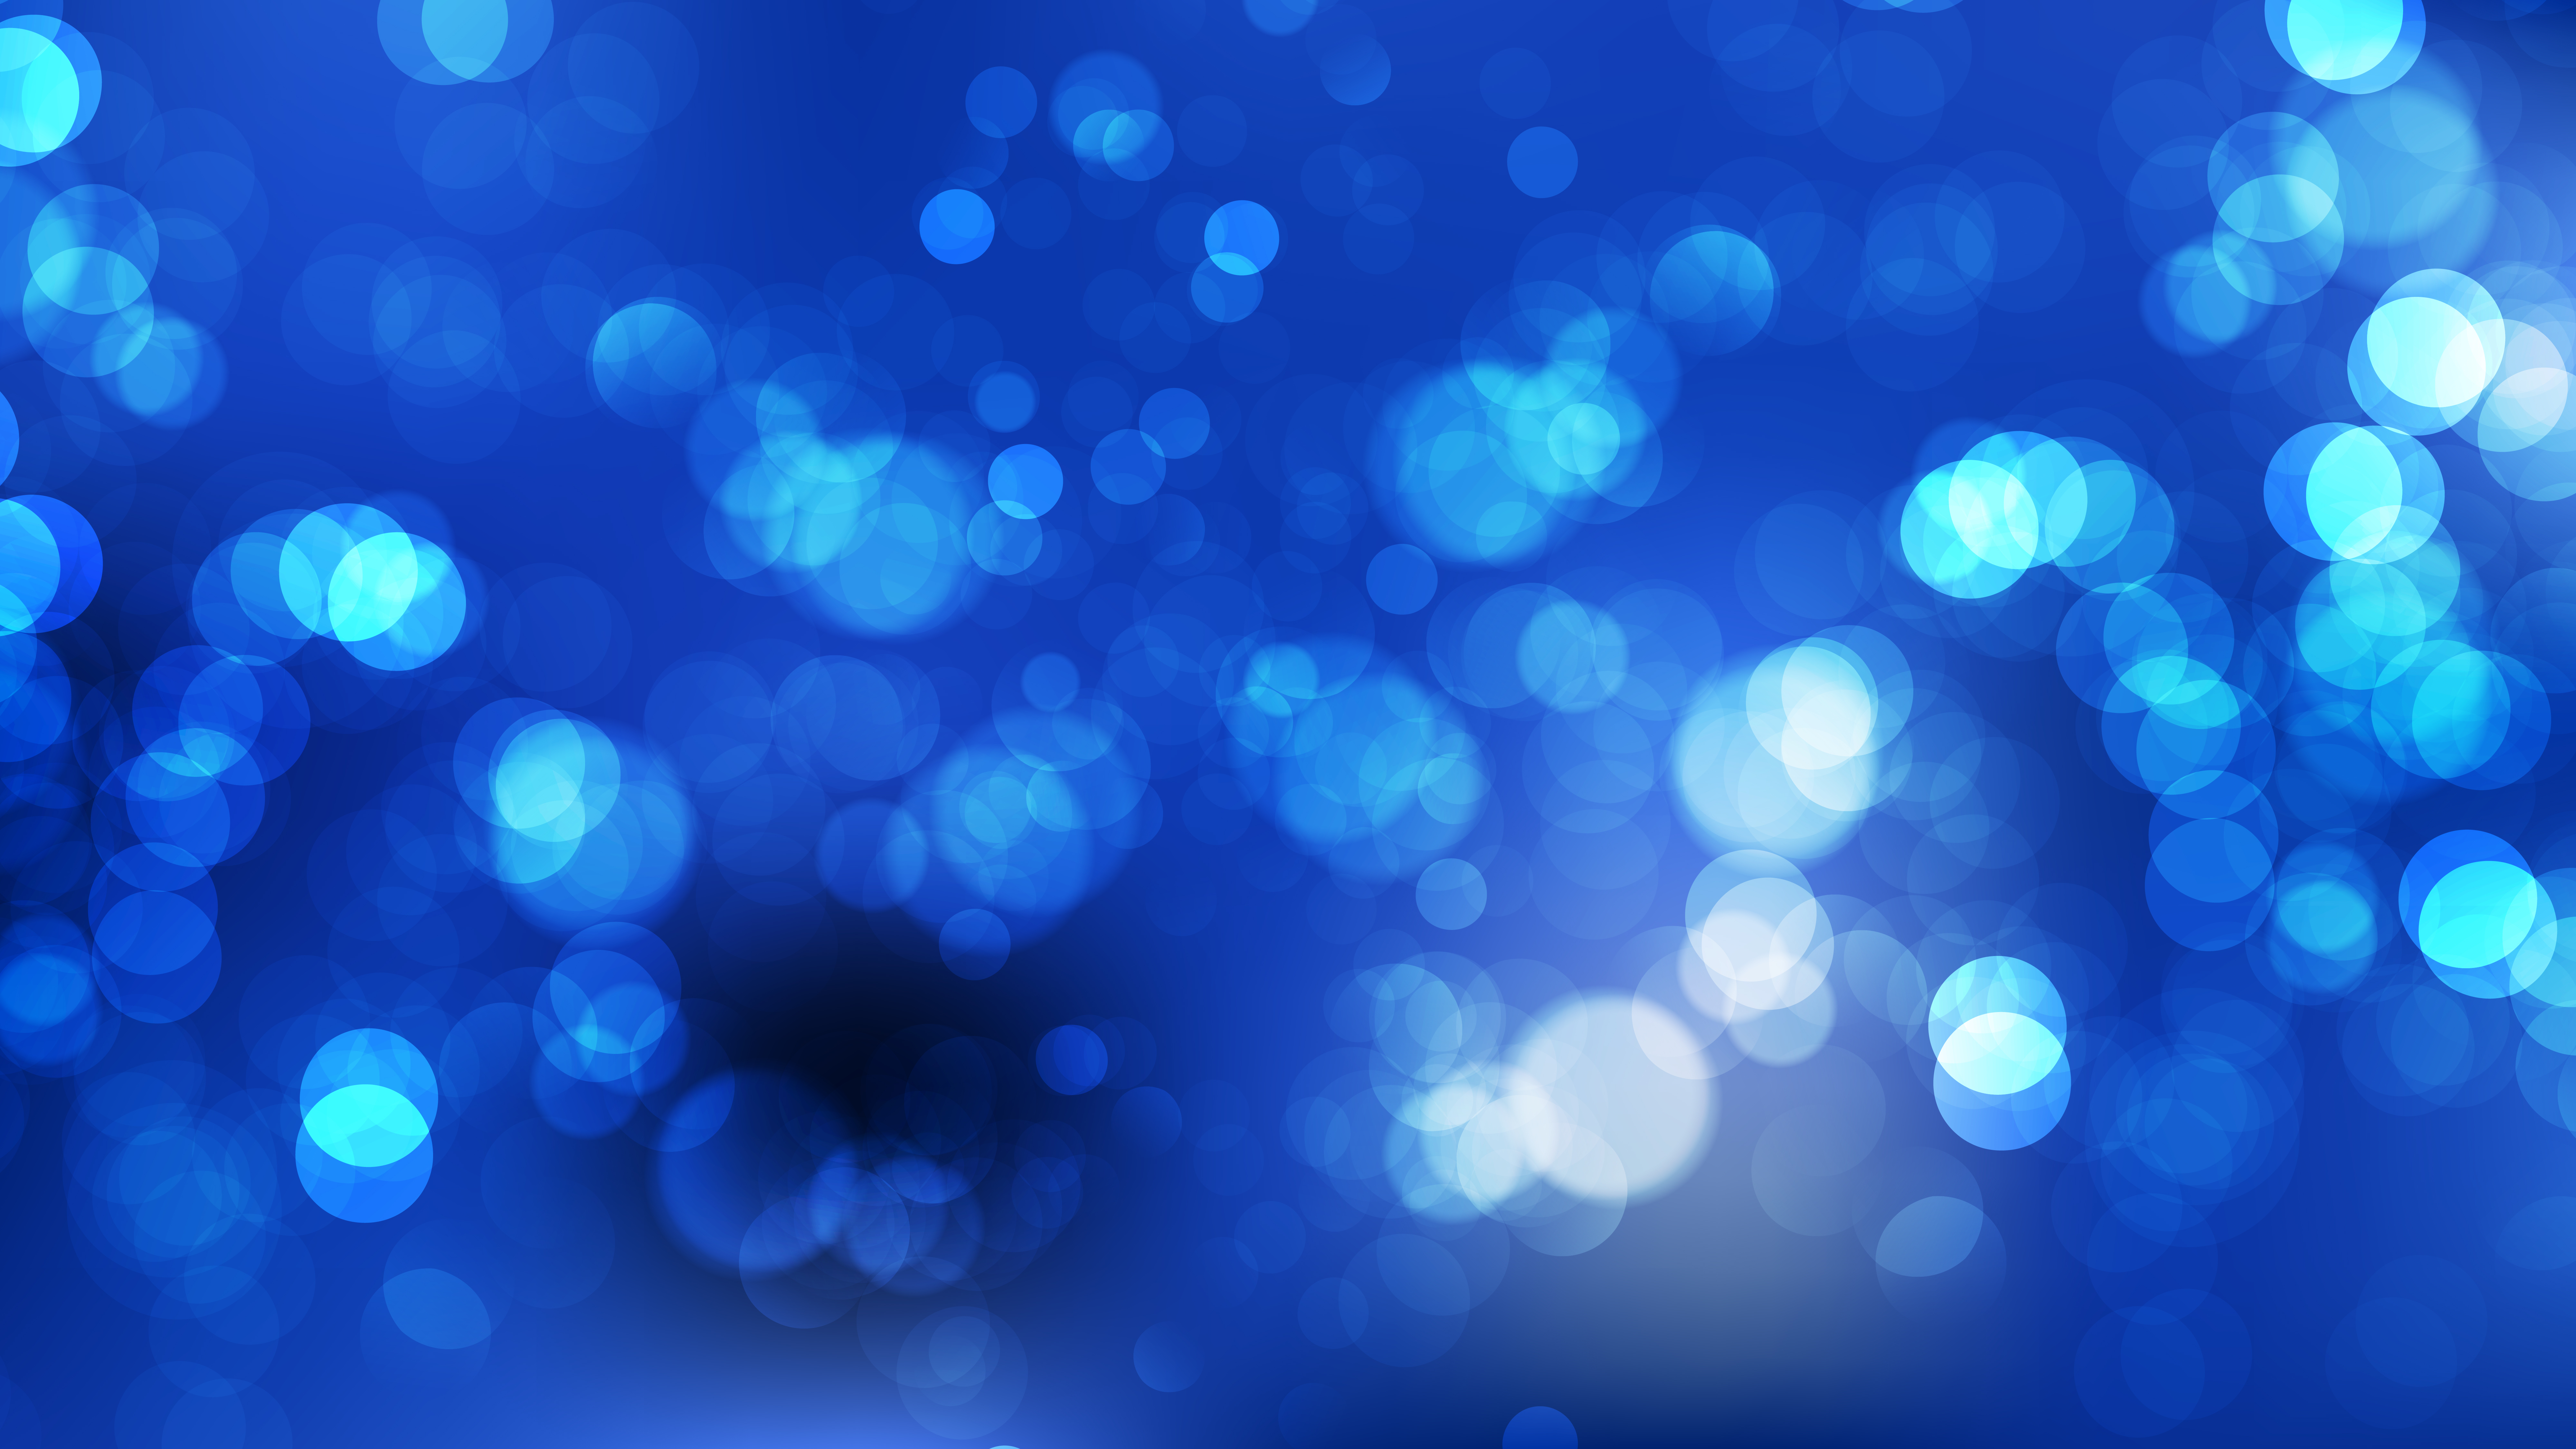 Free Abstract Dark Blue Blurred Bokeh Background Image